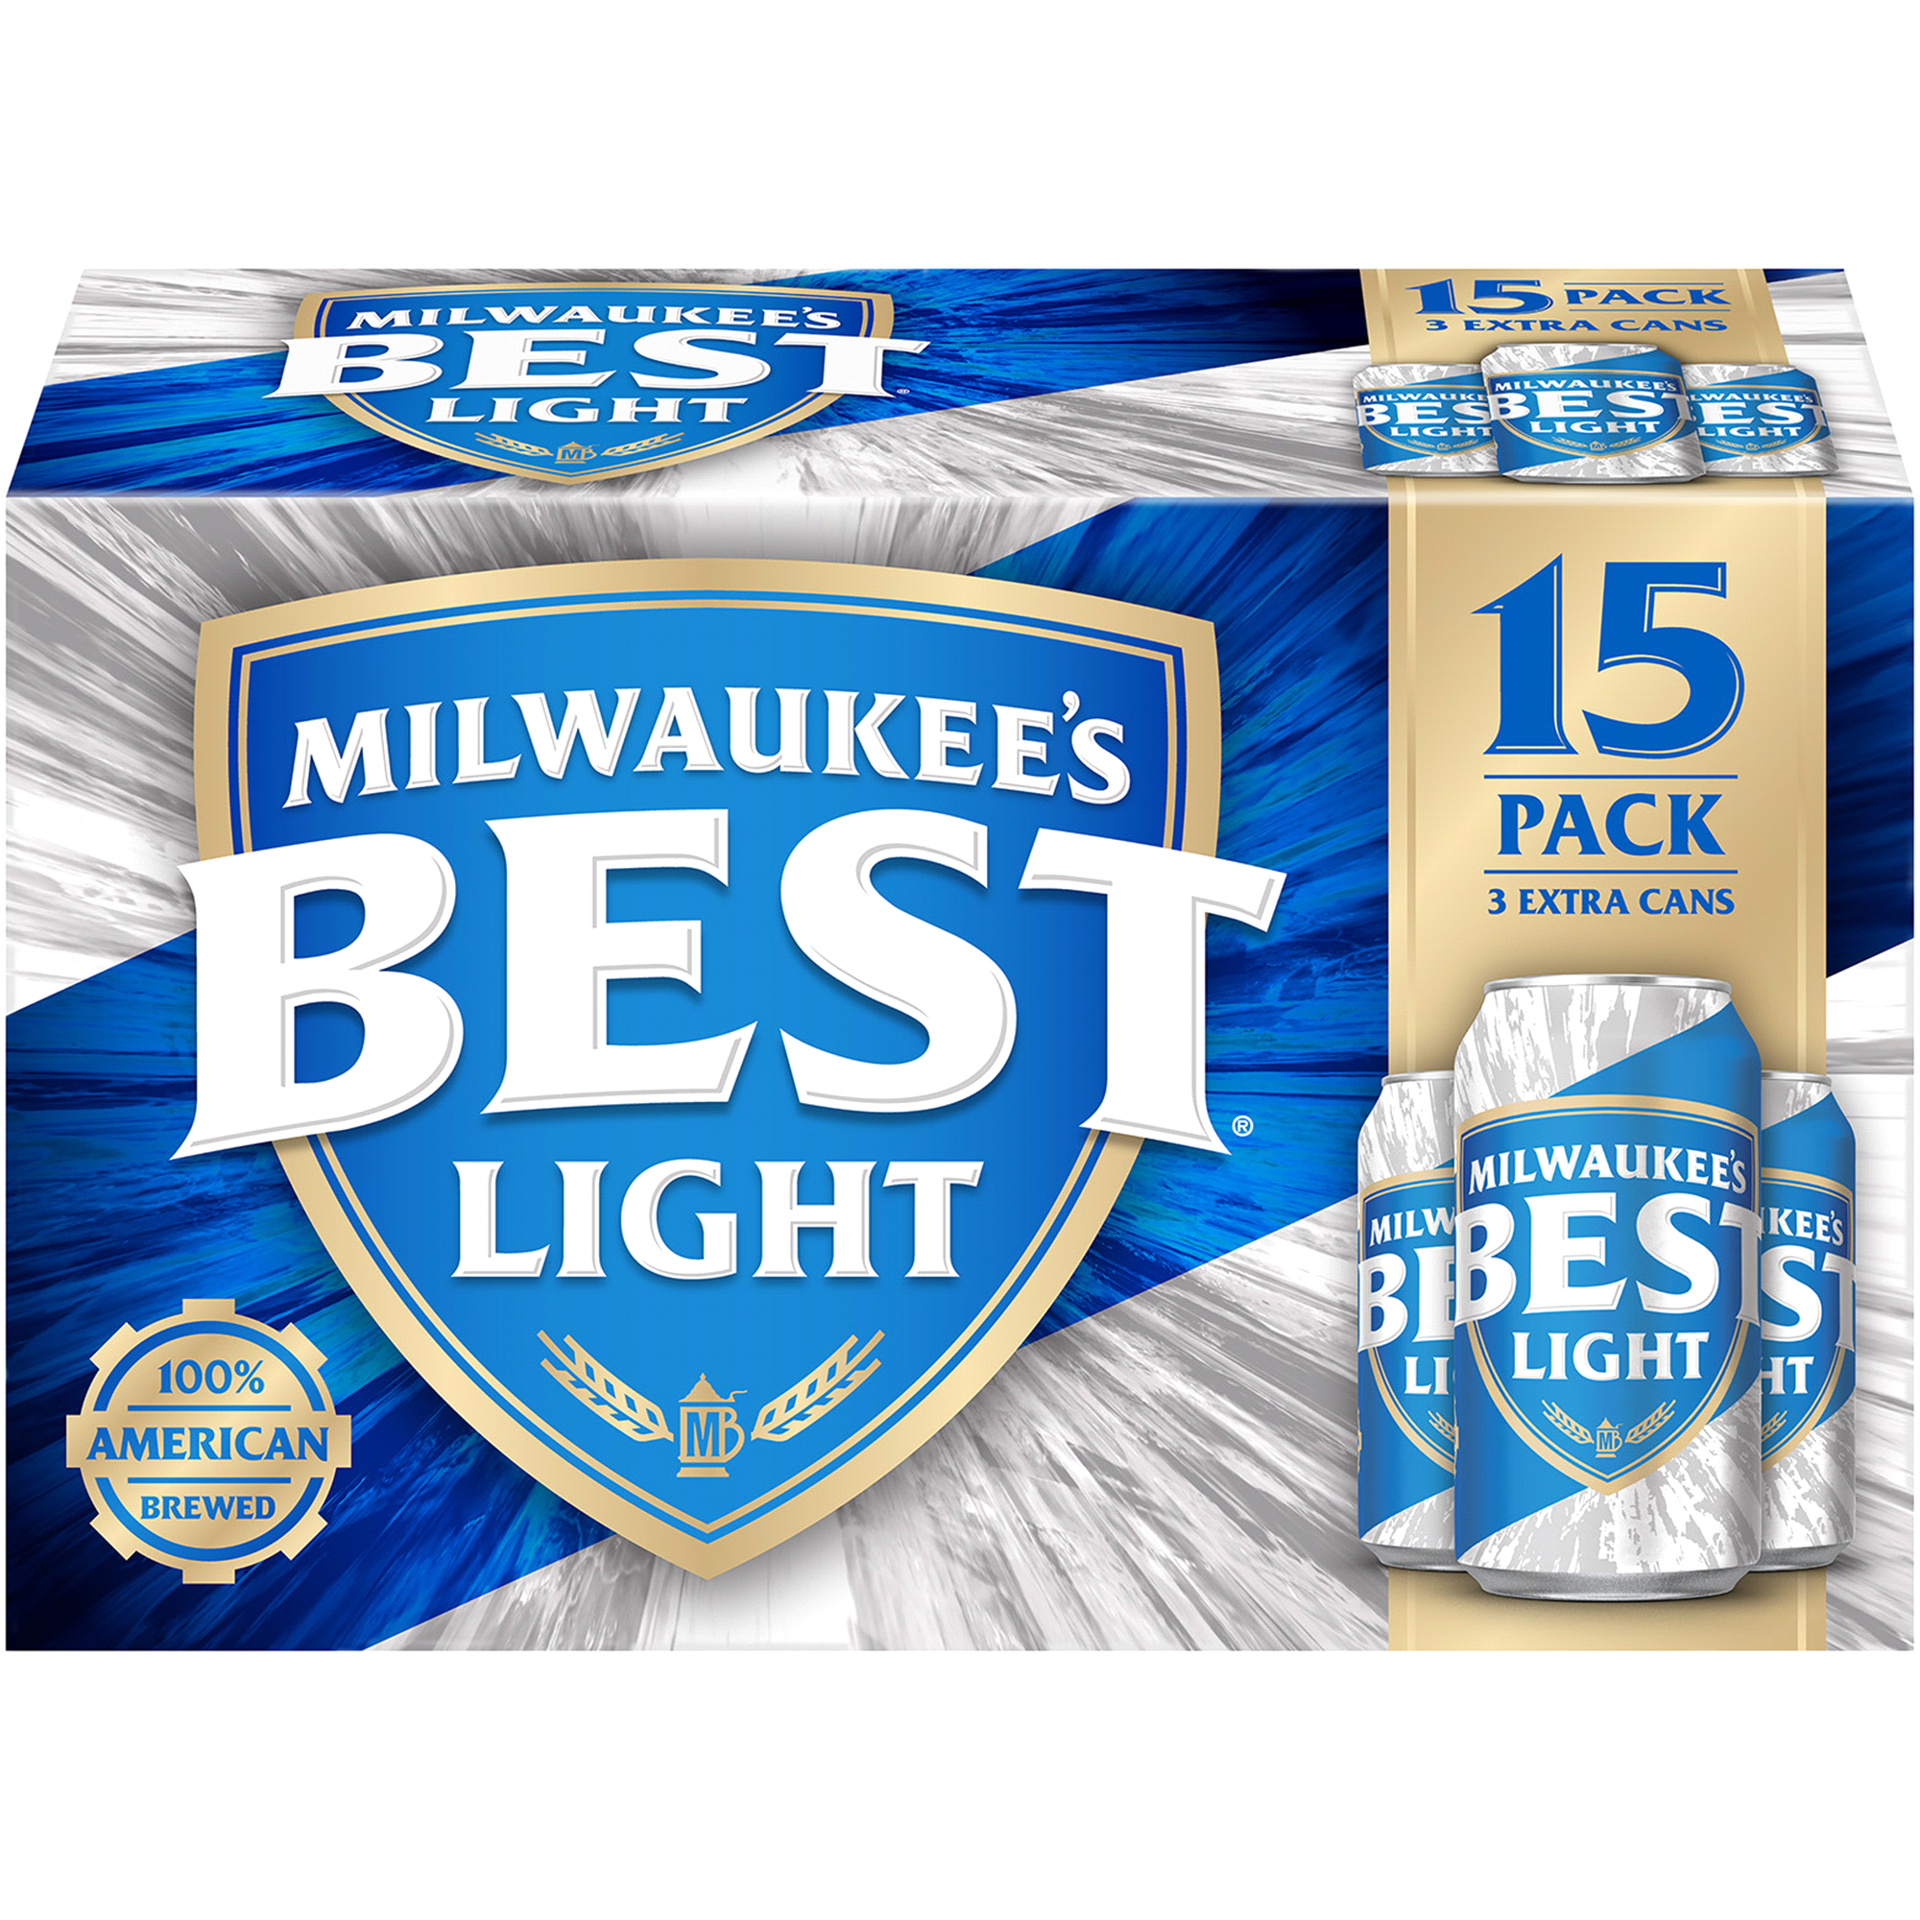 slide 11 of 13, Milwaukee's Best American Lager, 4.1% ABV, 15-pack, 12-oz. beer cans, 15 ct; 12 fl oz